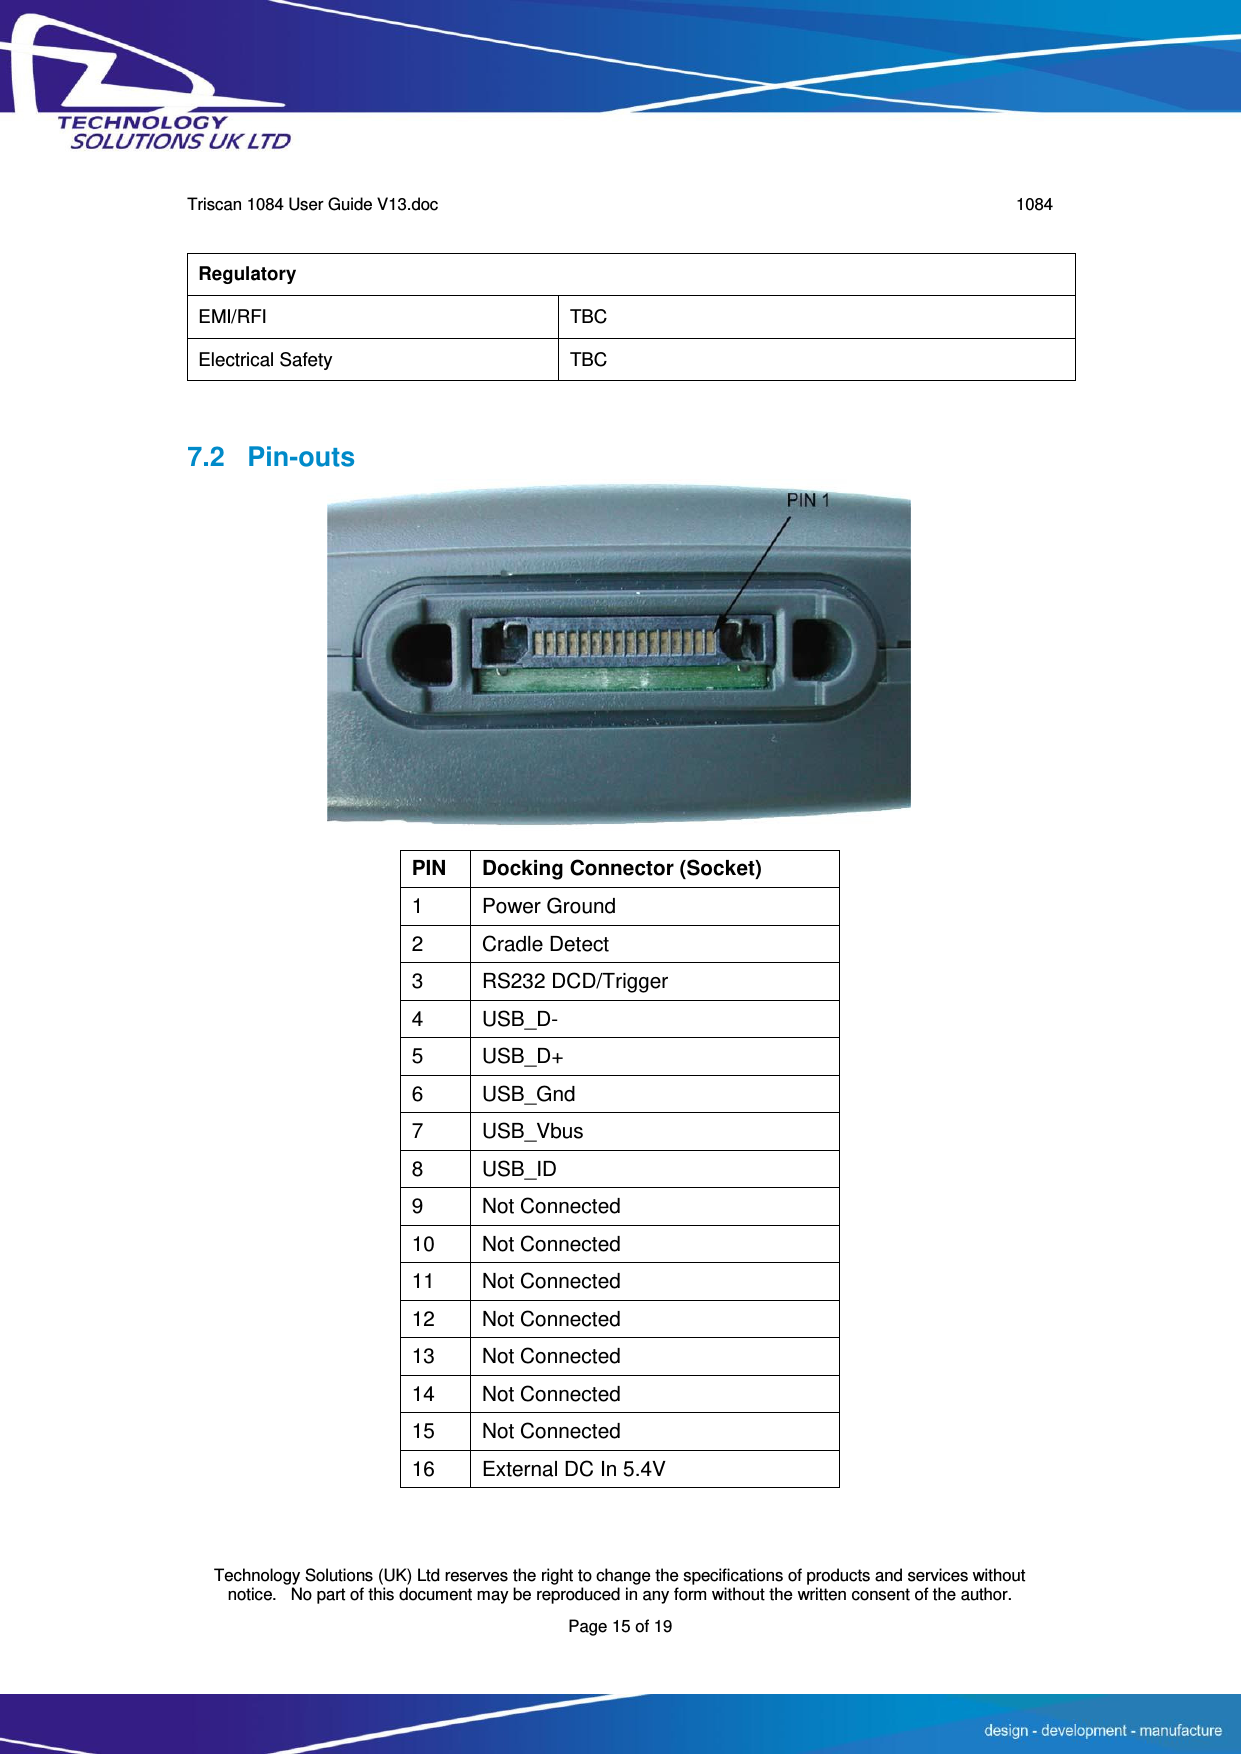      Triscan 1084 User Guide V13.doc   1084  Technology Solutions (UK) Ltd reserves the right to change the specifications of products and services without notice.   No part of this document may be reproduced in any form without the written consent of the author. Page 15 of 19   7.2 Pin-outs           PIN Docking Connector (Socket) 1 Power Ground 2 Cradle Detect 3 RS232 DCD/Trigger 4 USB_D- 5 USB_D+ 6 USB_Gnd 7 USB_Vbus 8 USB_ID 9 Not Connected 10 Not Connected 11 Not Connected 12 Not Connected 13 Not Connected 14 Not Connected 15 Not Connected 16 External DC In 5.4V  Regulatory EMI/RFI TBC Electrical Safety TBC 